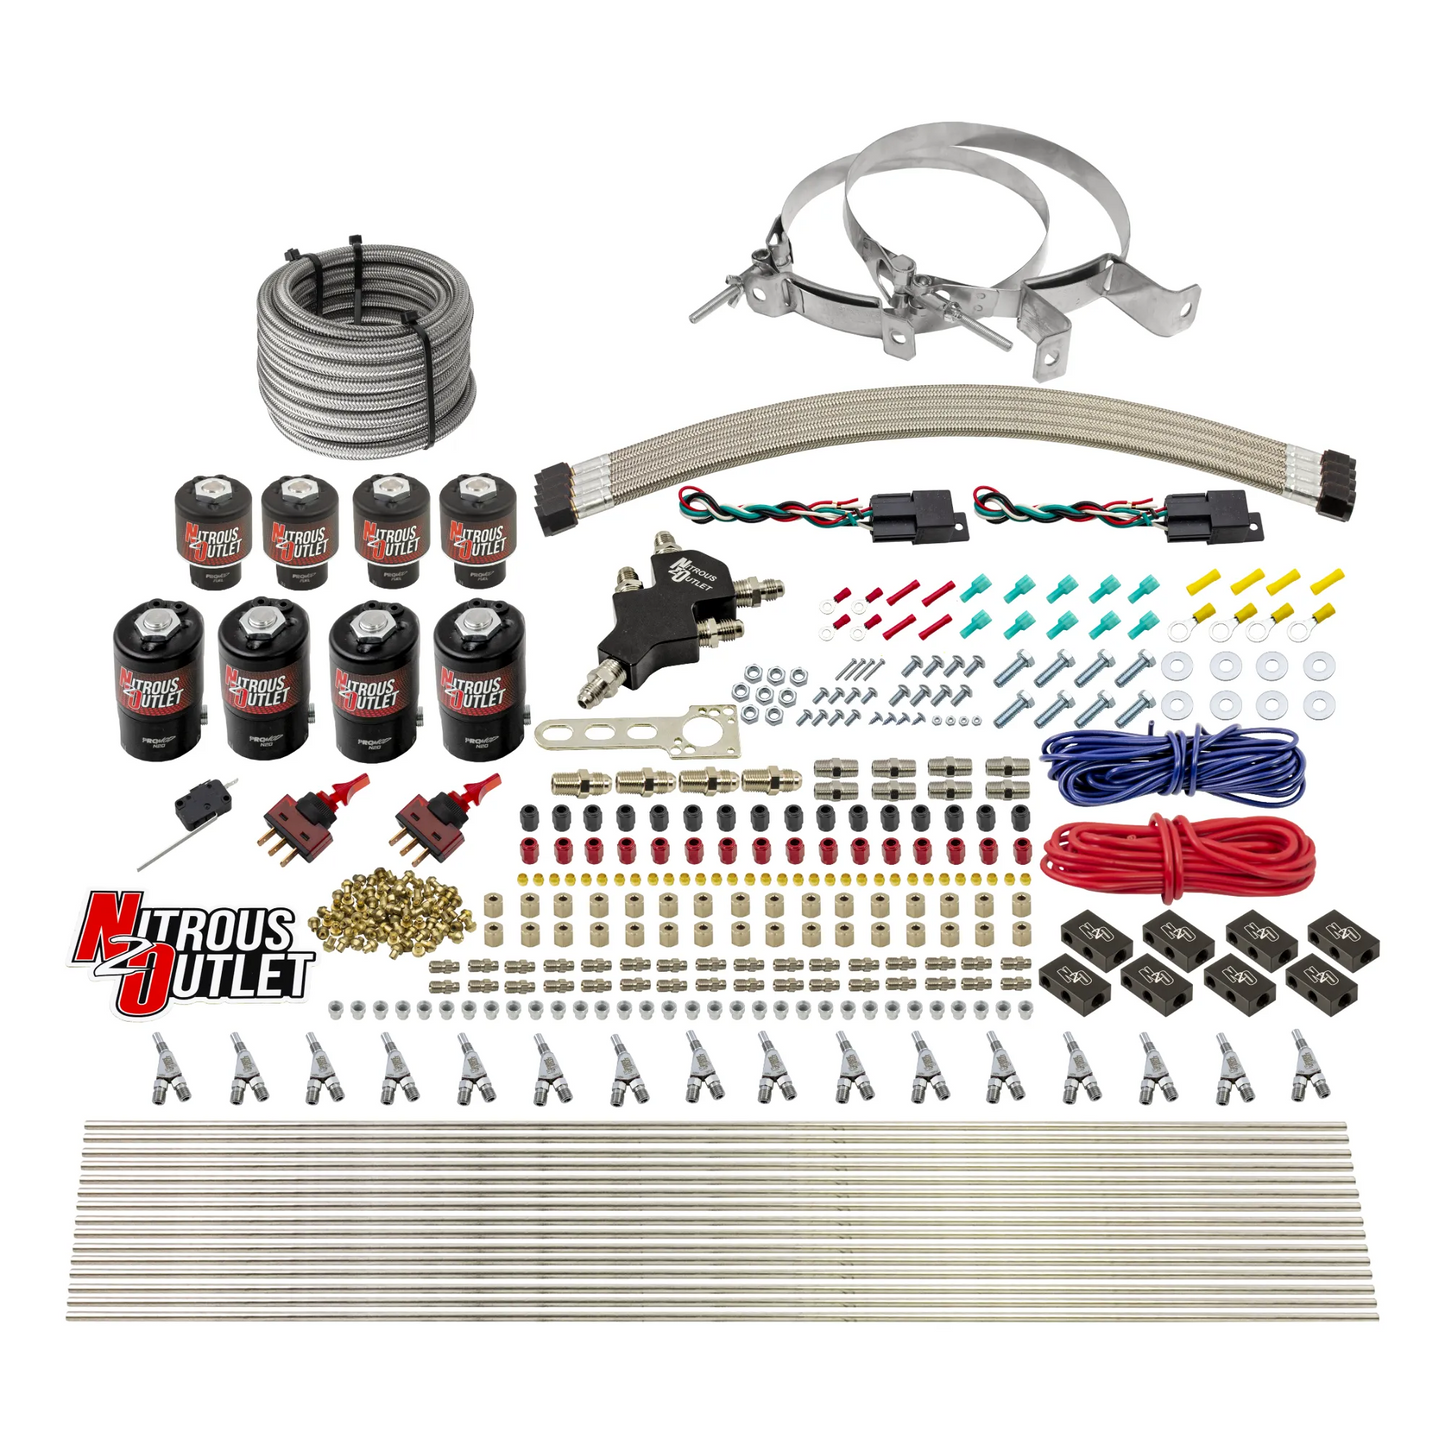 8 Cylinder Dual Stage Direct Port Nitrous System - .122 Nitrous/.177 Fuel Solenoids - Alcohol - Straight Blow Through Nozzles